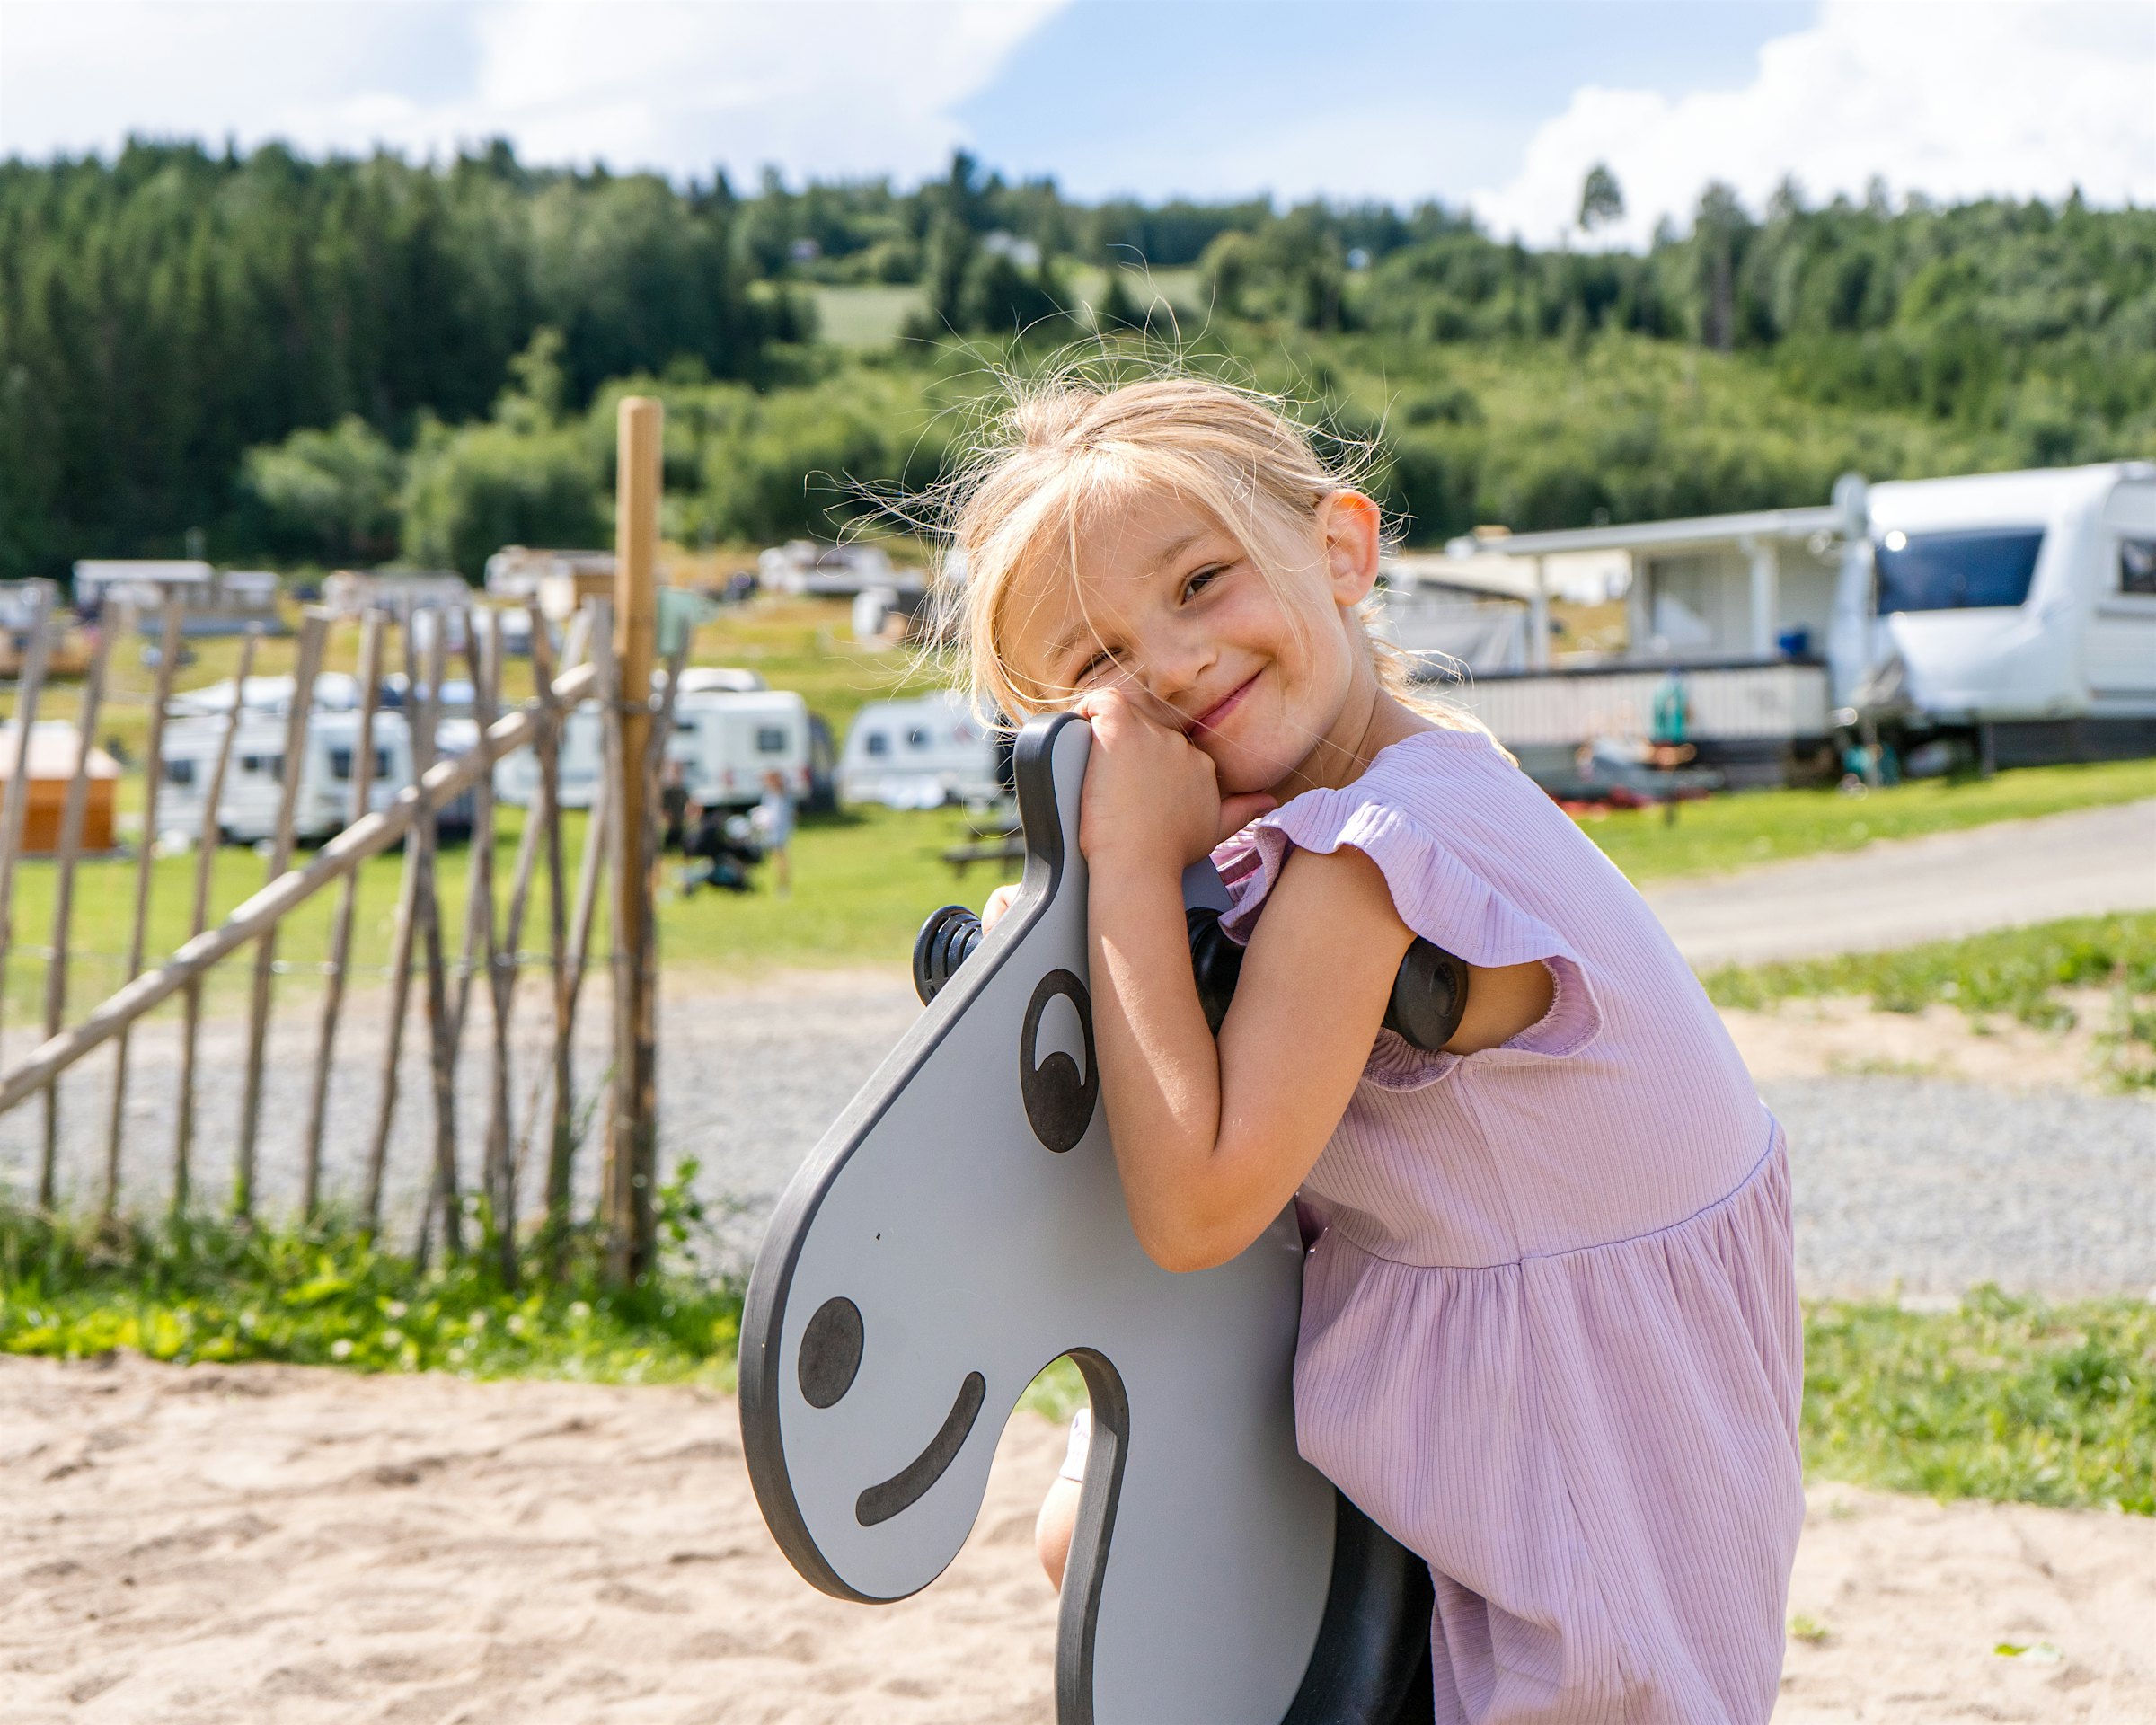 Girl plays on a playground with a campsite in the background. Photo